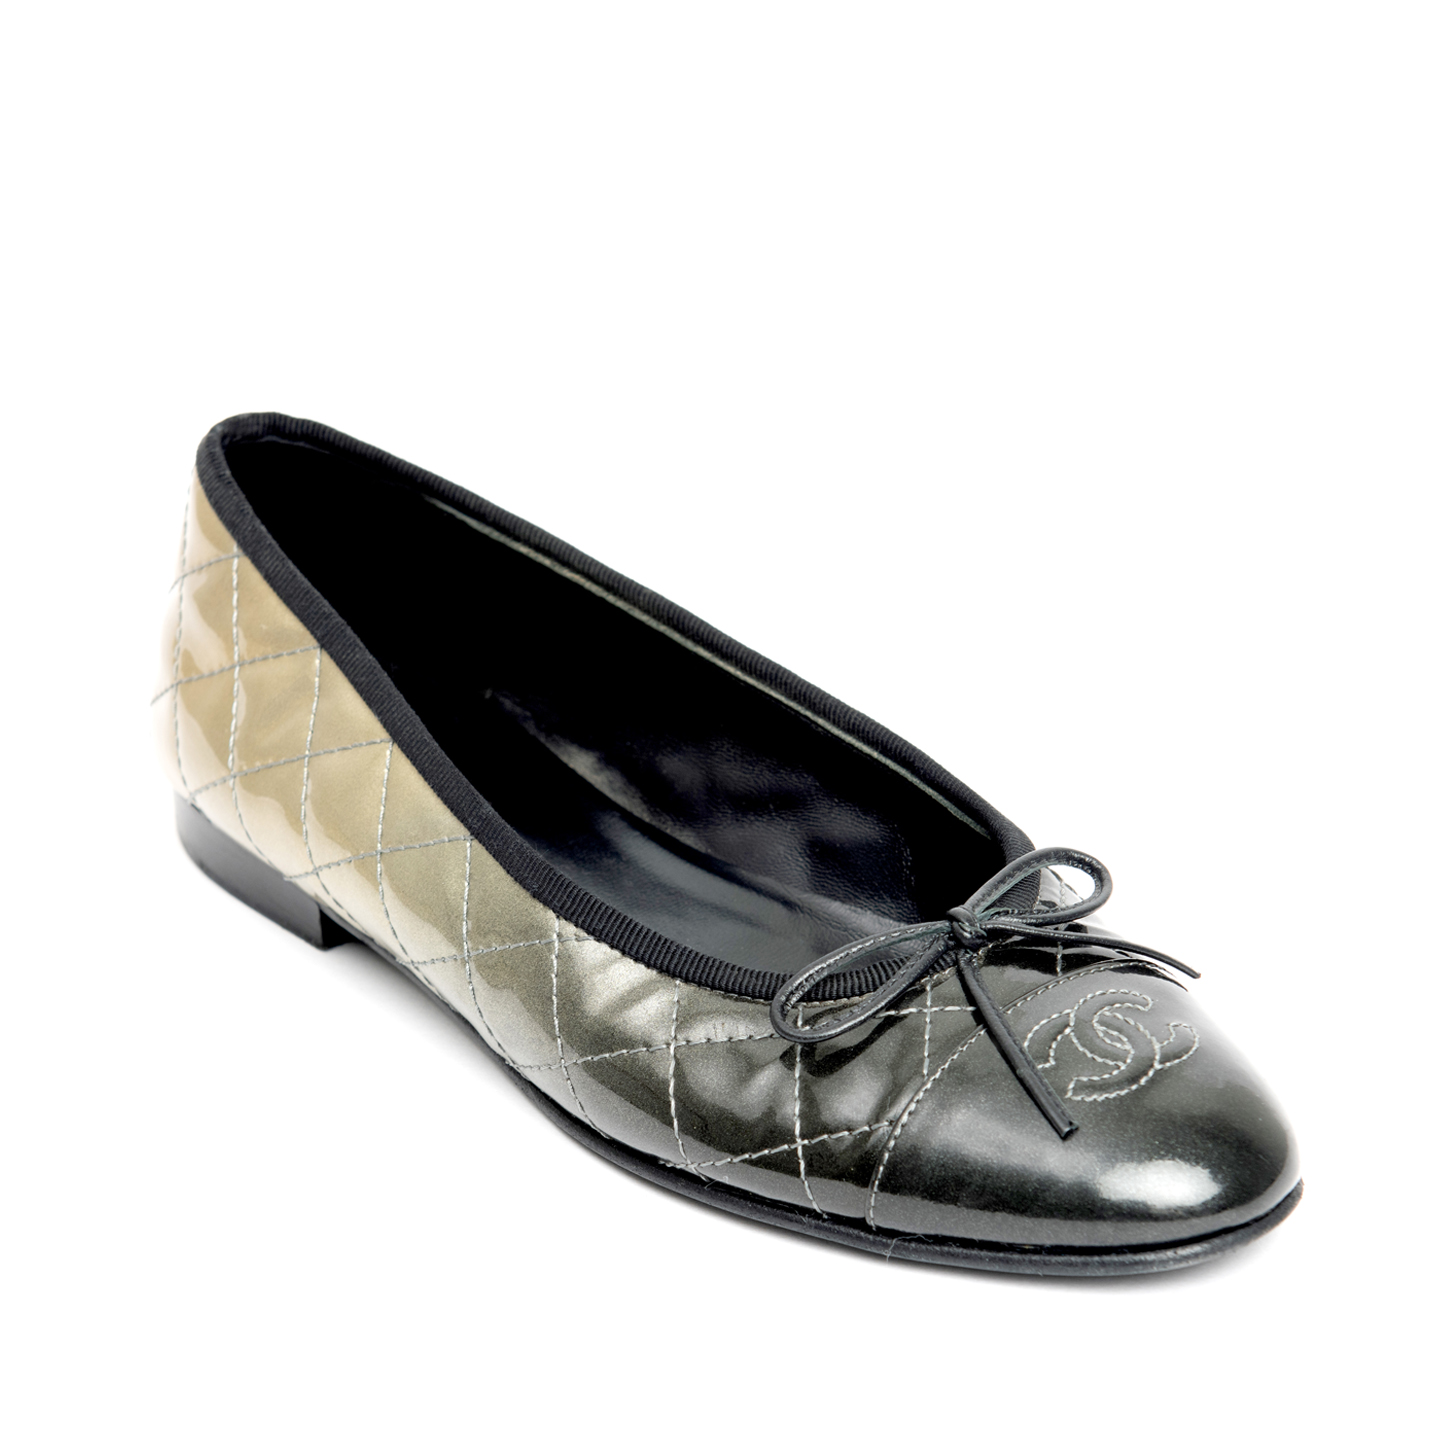 Chanel Black and Grey Ombre Cap-Toe Ballet Flats, Size 38.5